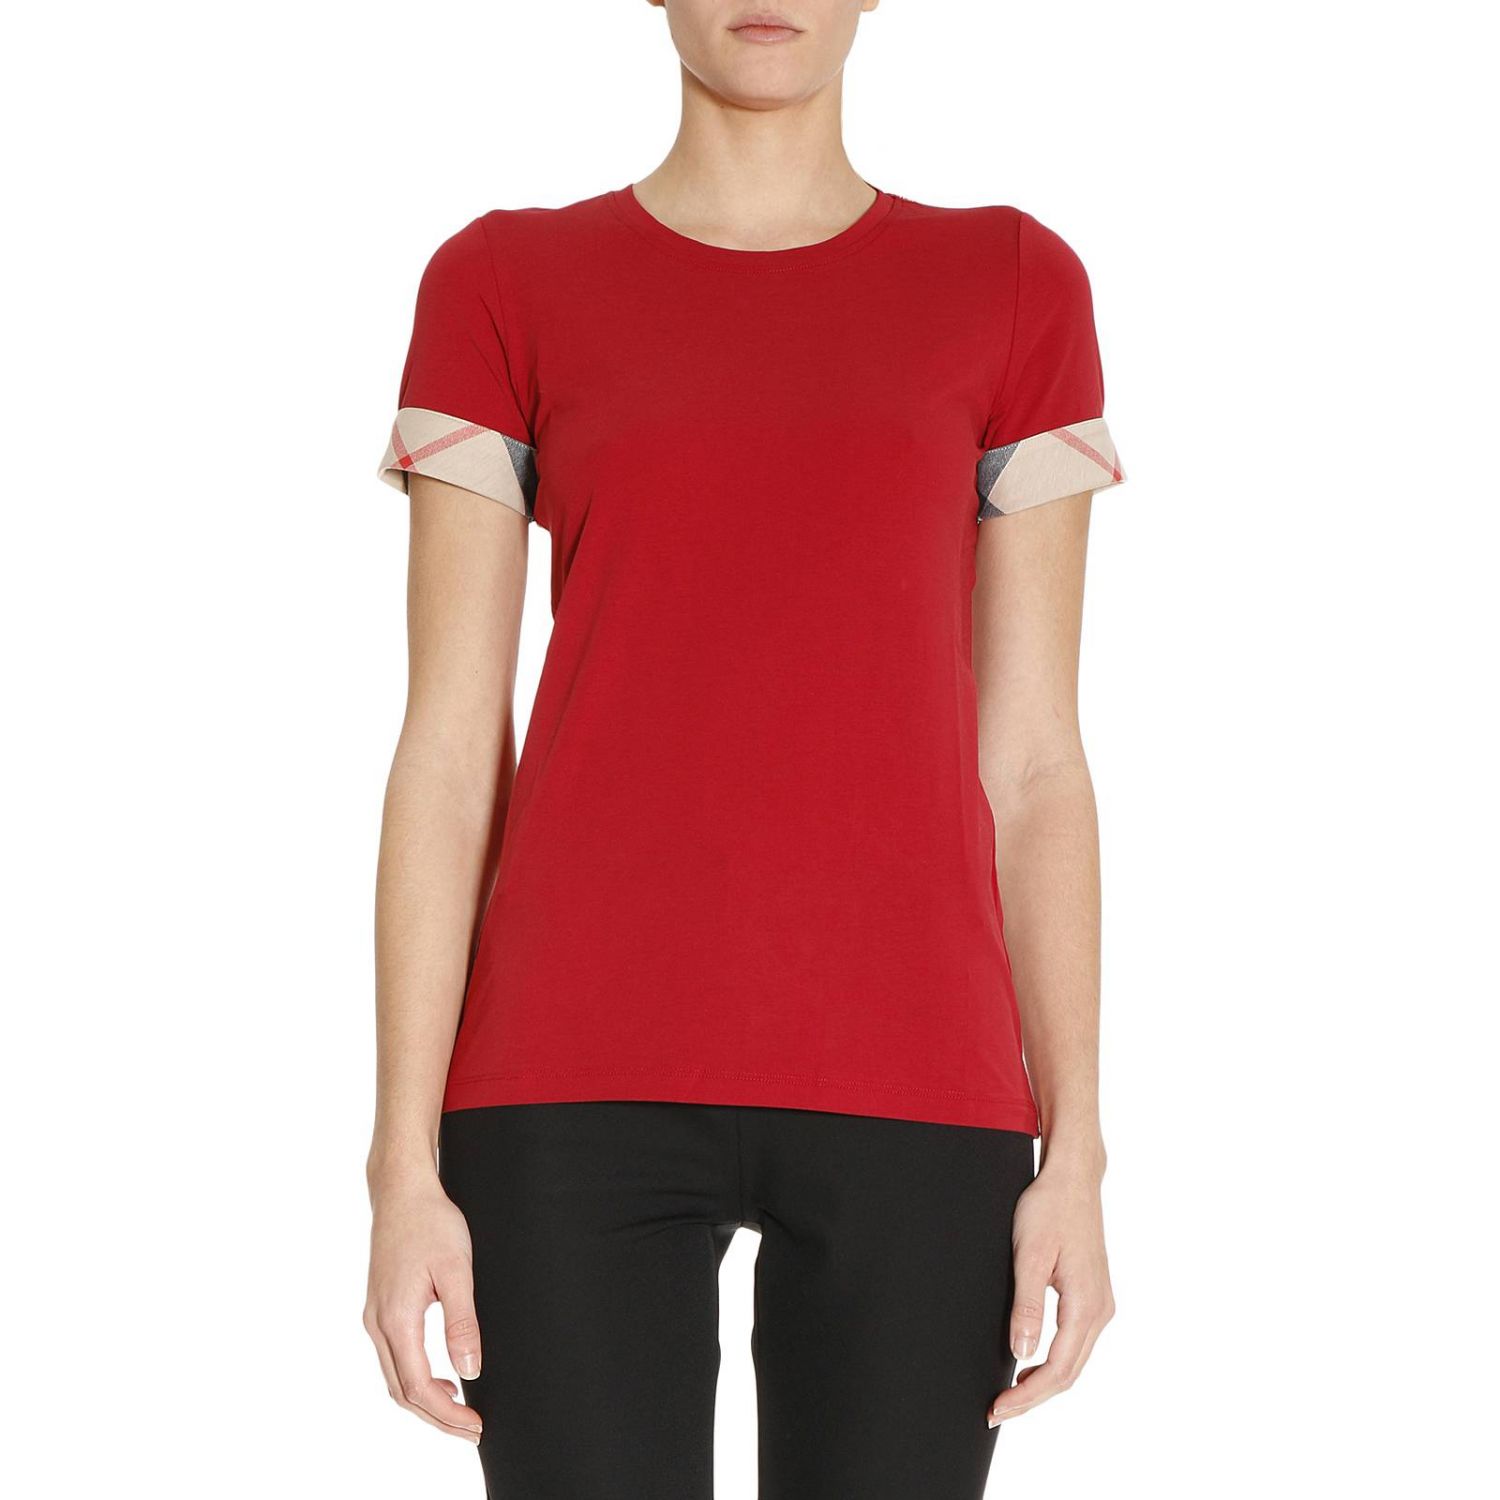 burberry t shirt for ladies